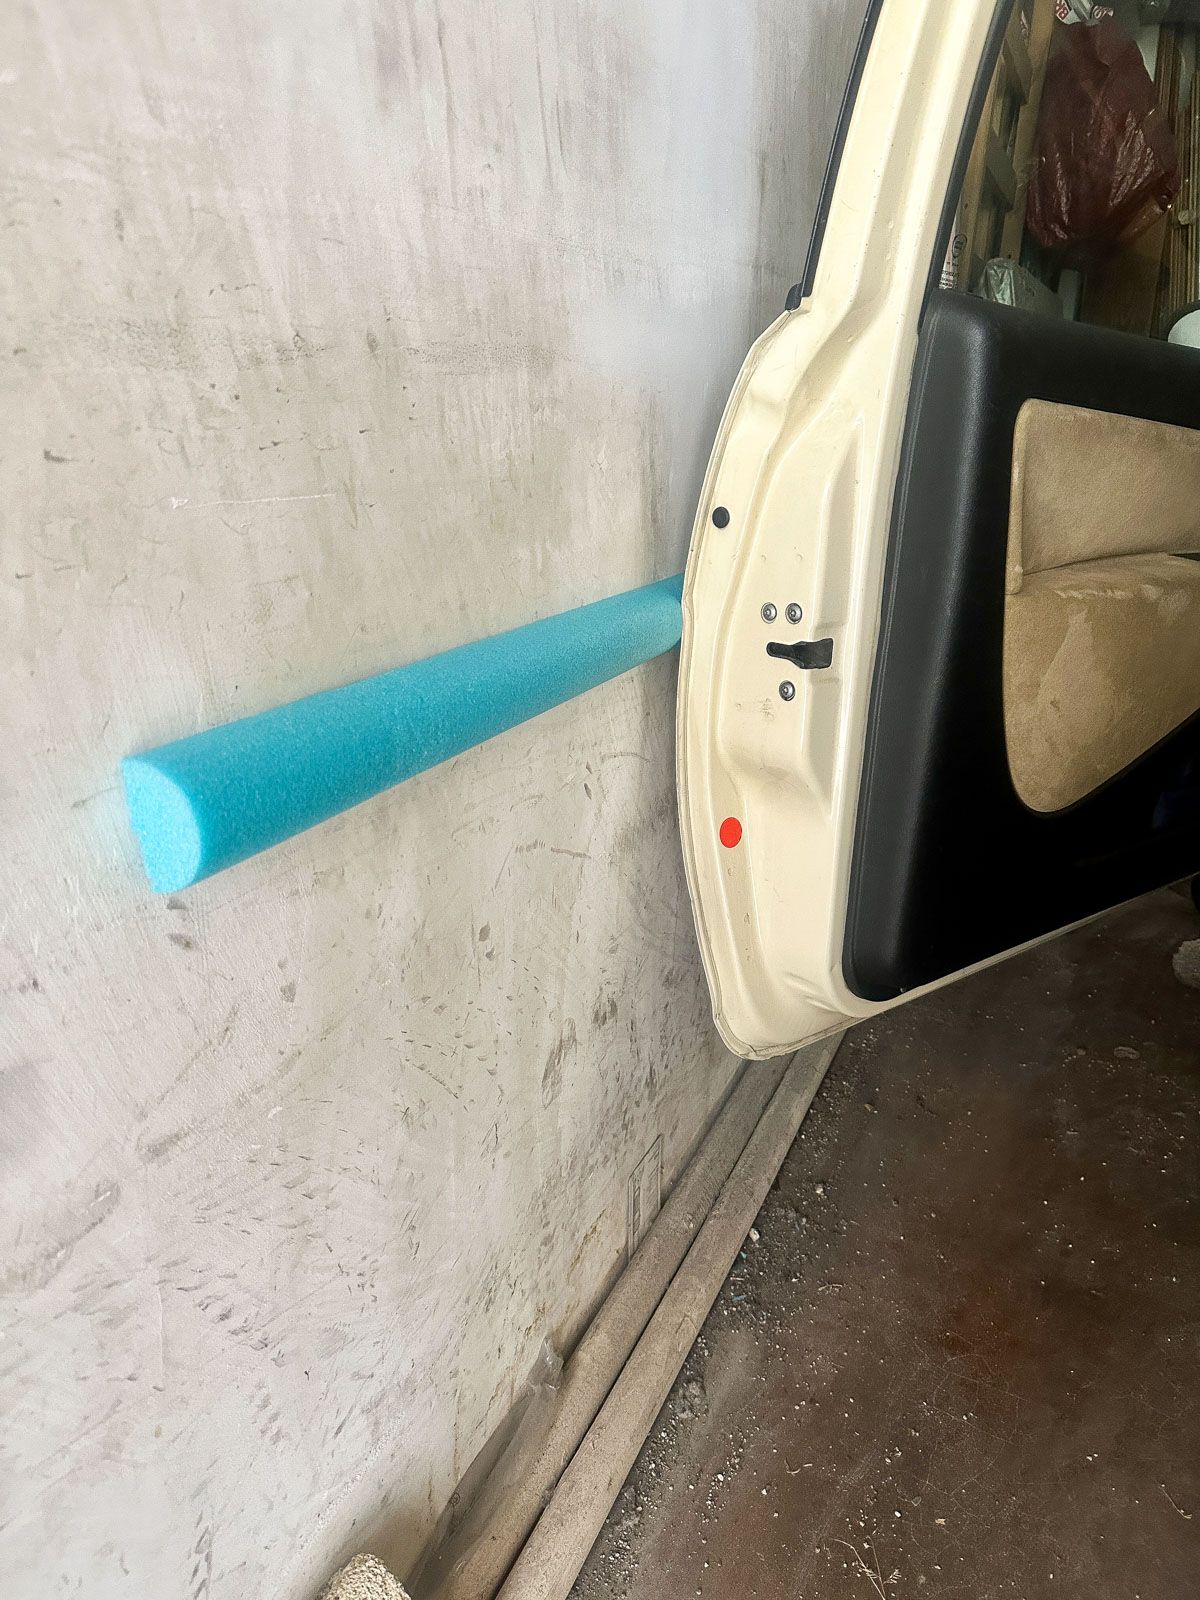 Attach a Pool Noodle to the Garage Wall to Protect Your Car